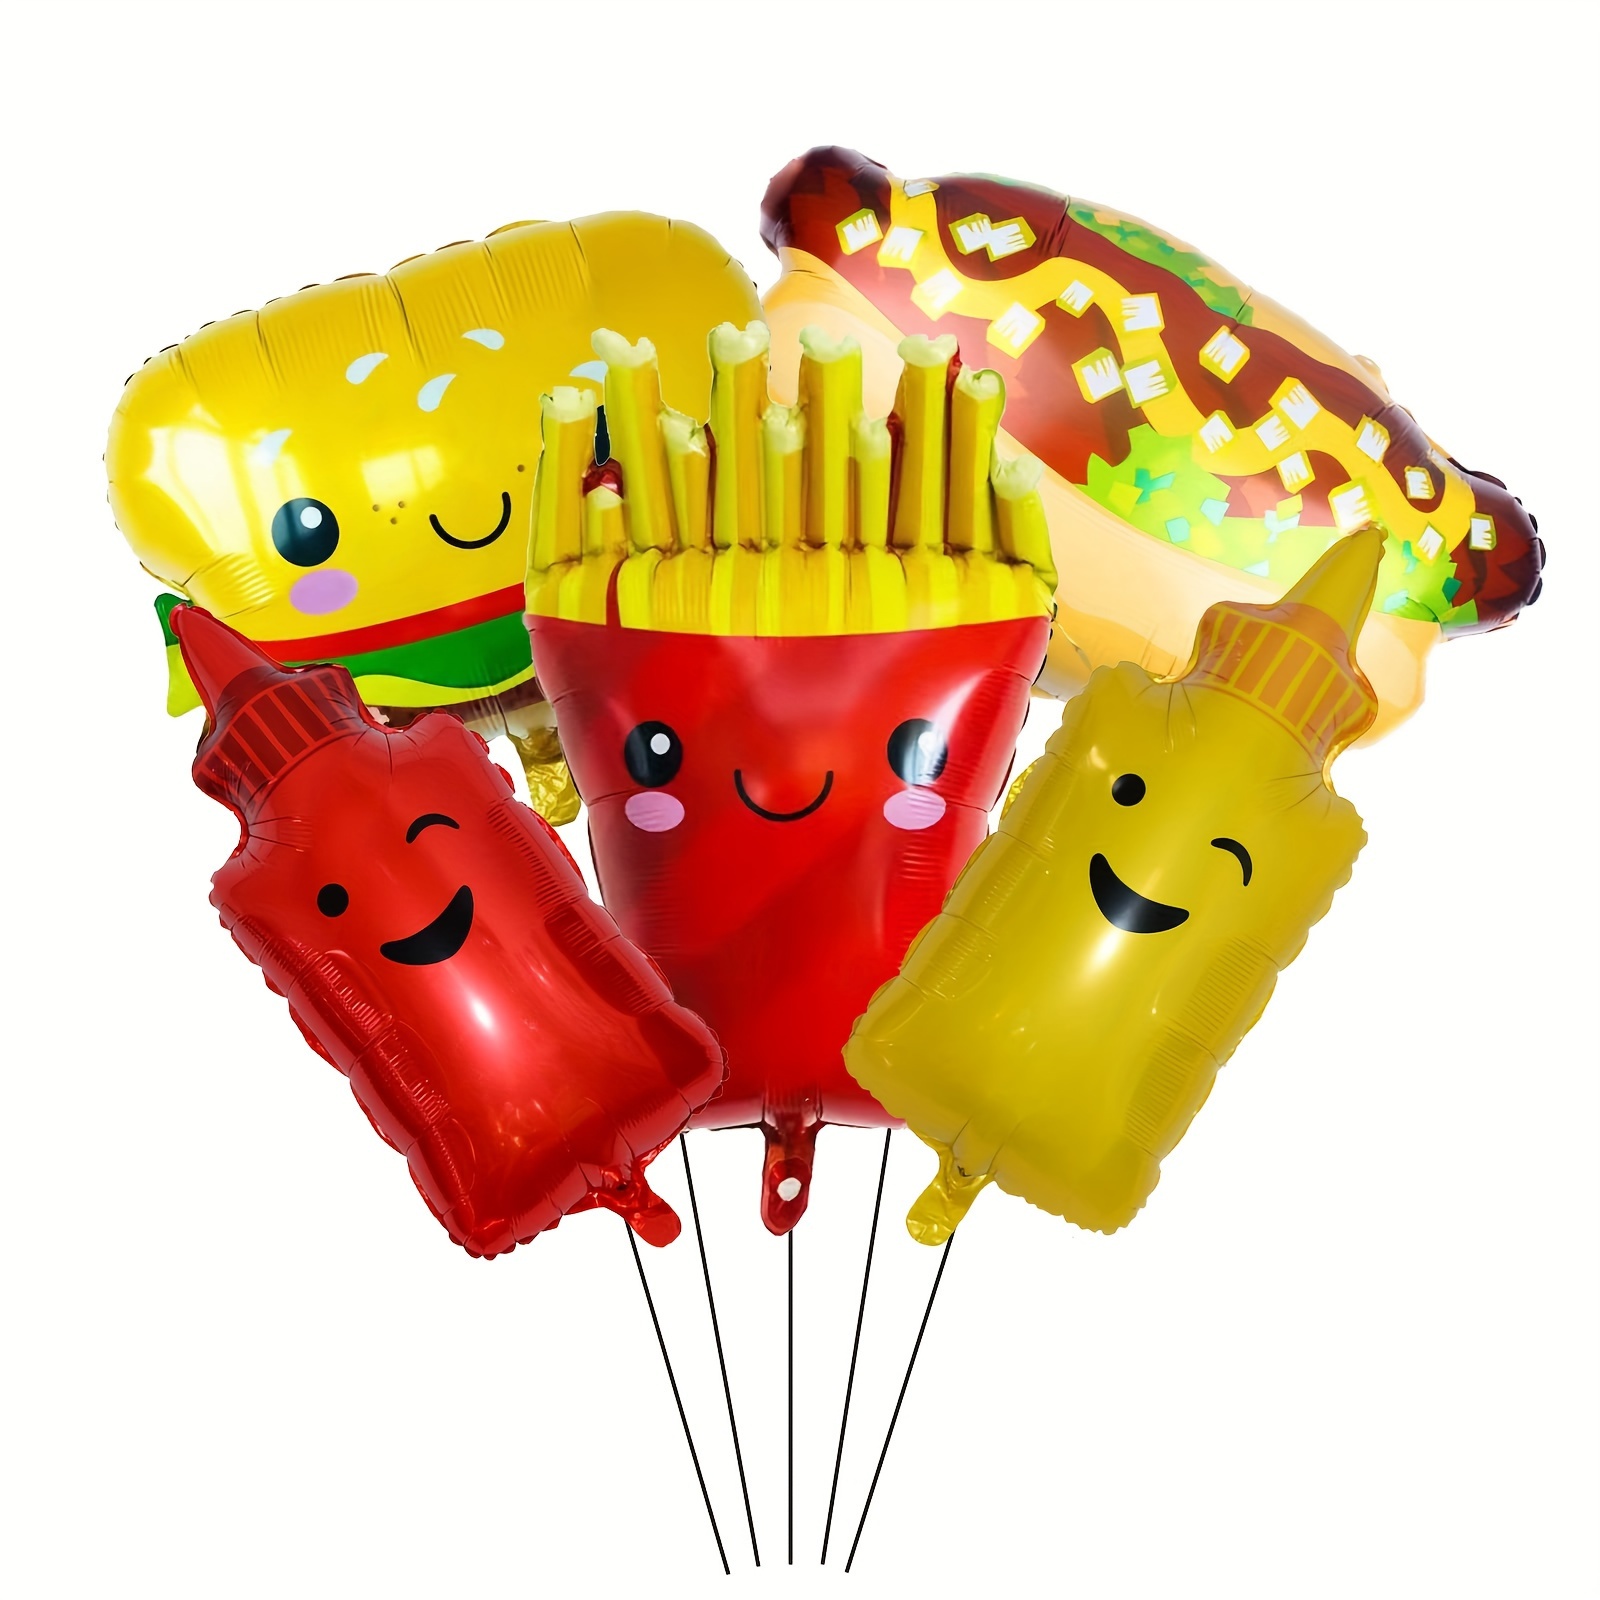 

5-piece Ketchup & Mustard Bottle Foil Balloons For Bbq Parties, Birthdays, And Summer Celebrations